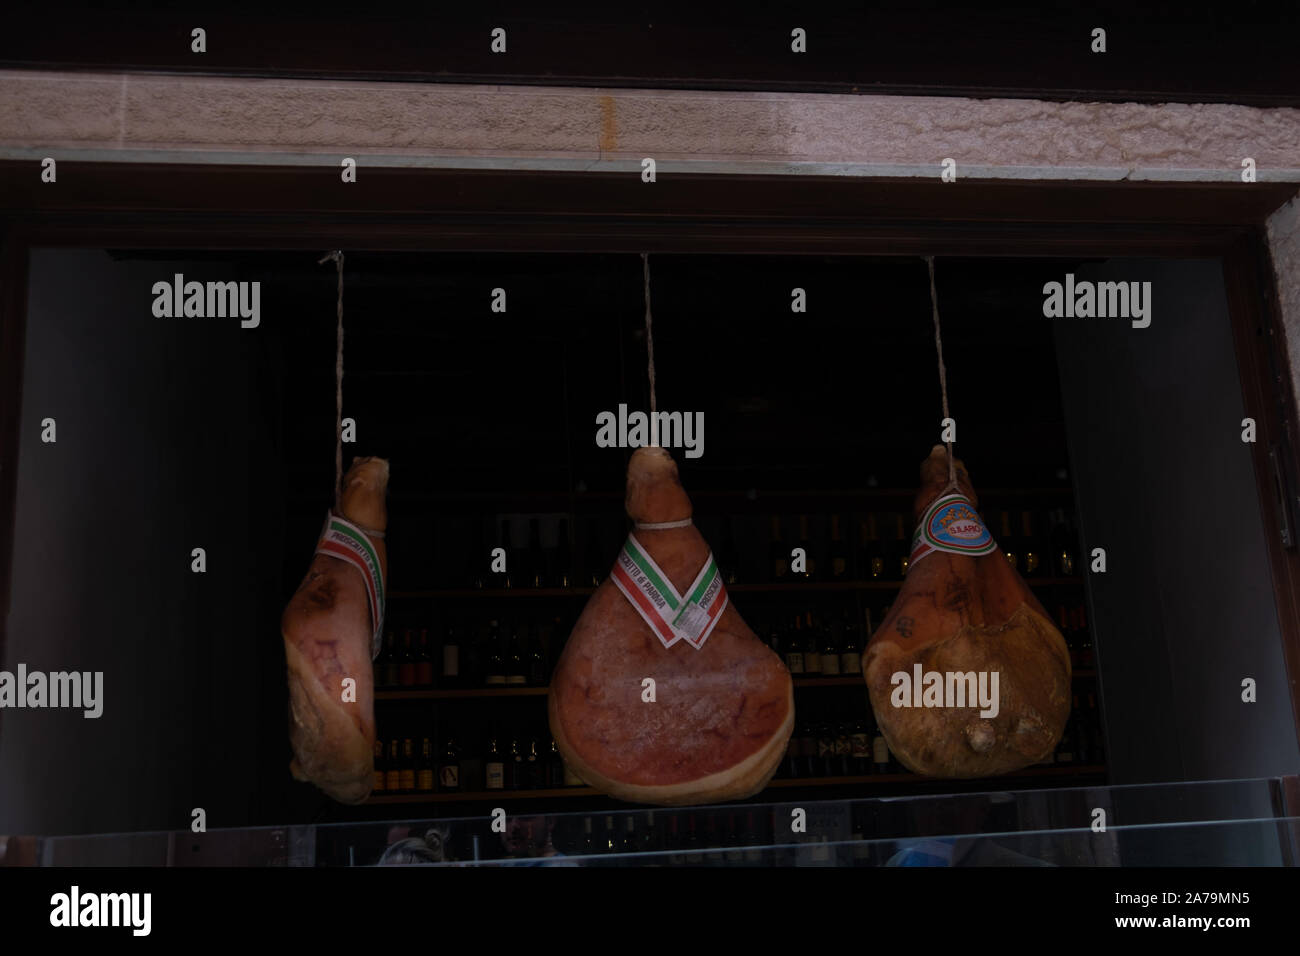 Three specialist and traditionally cured whole hams, hanging on ropes suspended from a wooden beam to the open aired front of a Venetian shop. Stock Photo